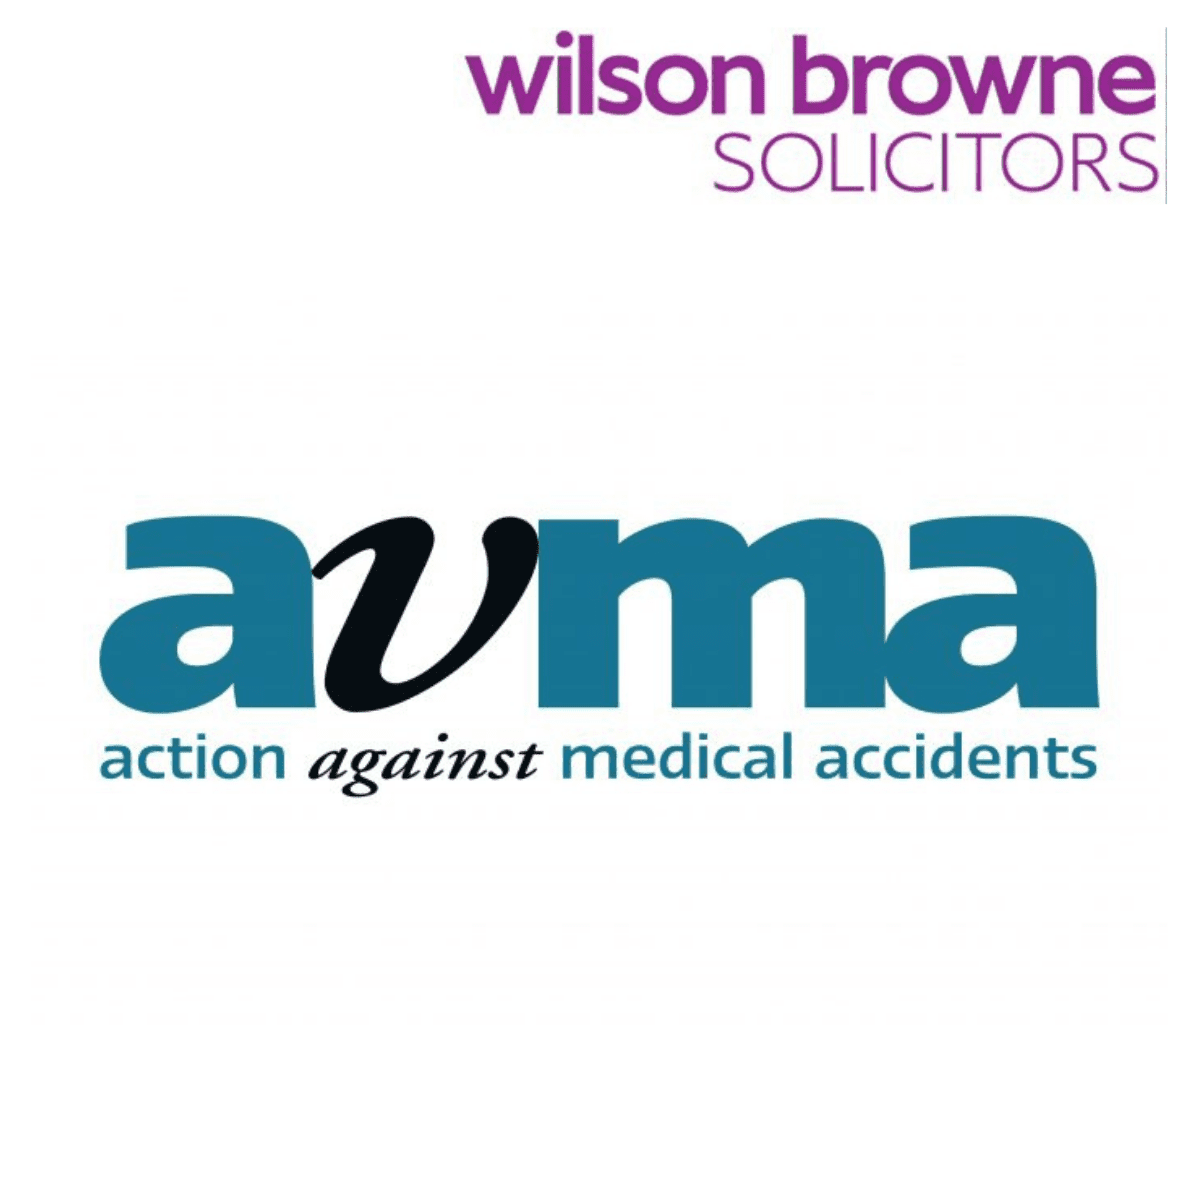 Wilson Browne Solicitors provide two team members for AvMA helpline